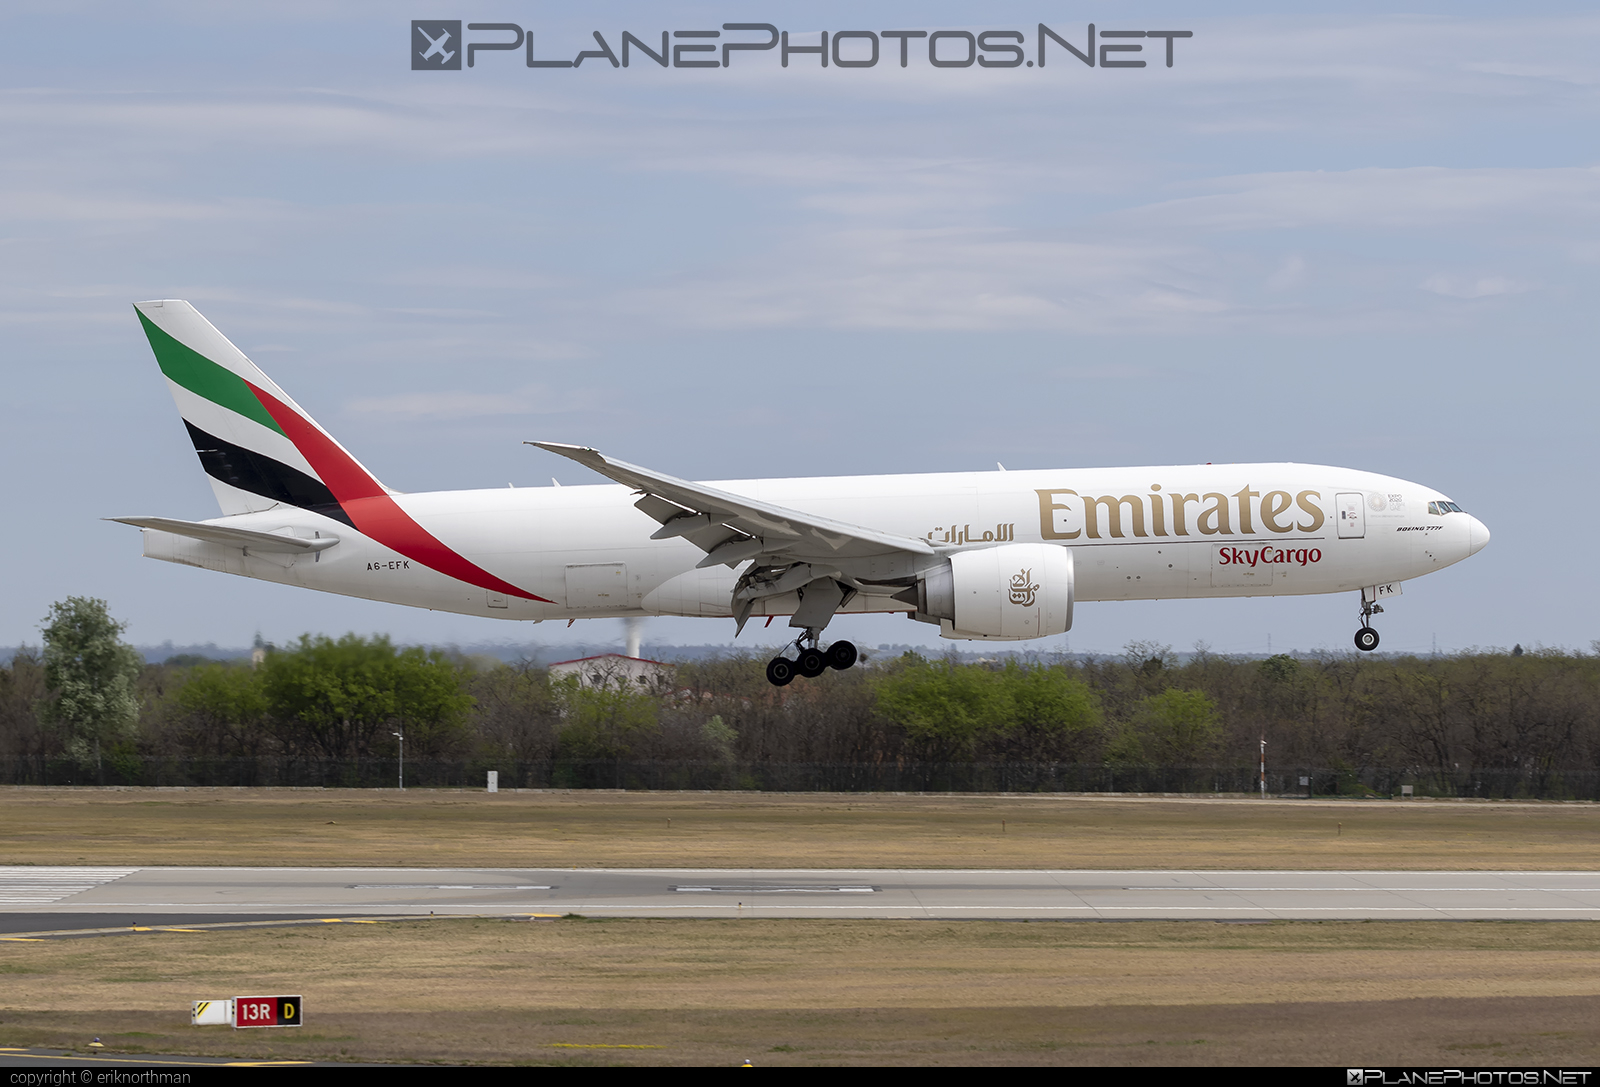 Boeing 777F - A6-EFK operated by Emirates SkyCargo #b777 #b777f #b777freighter #boeing #boeing777 #tripleseven